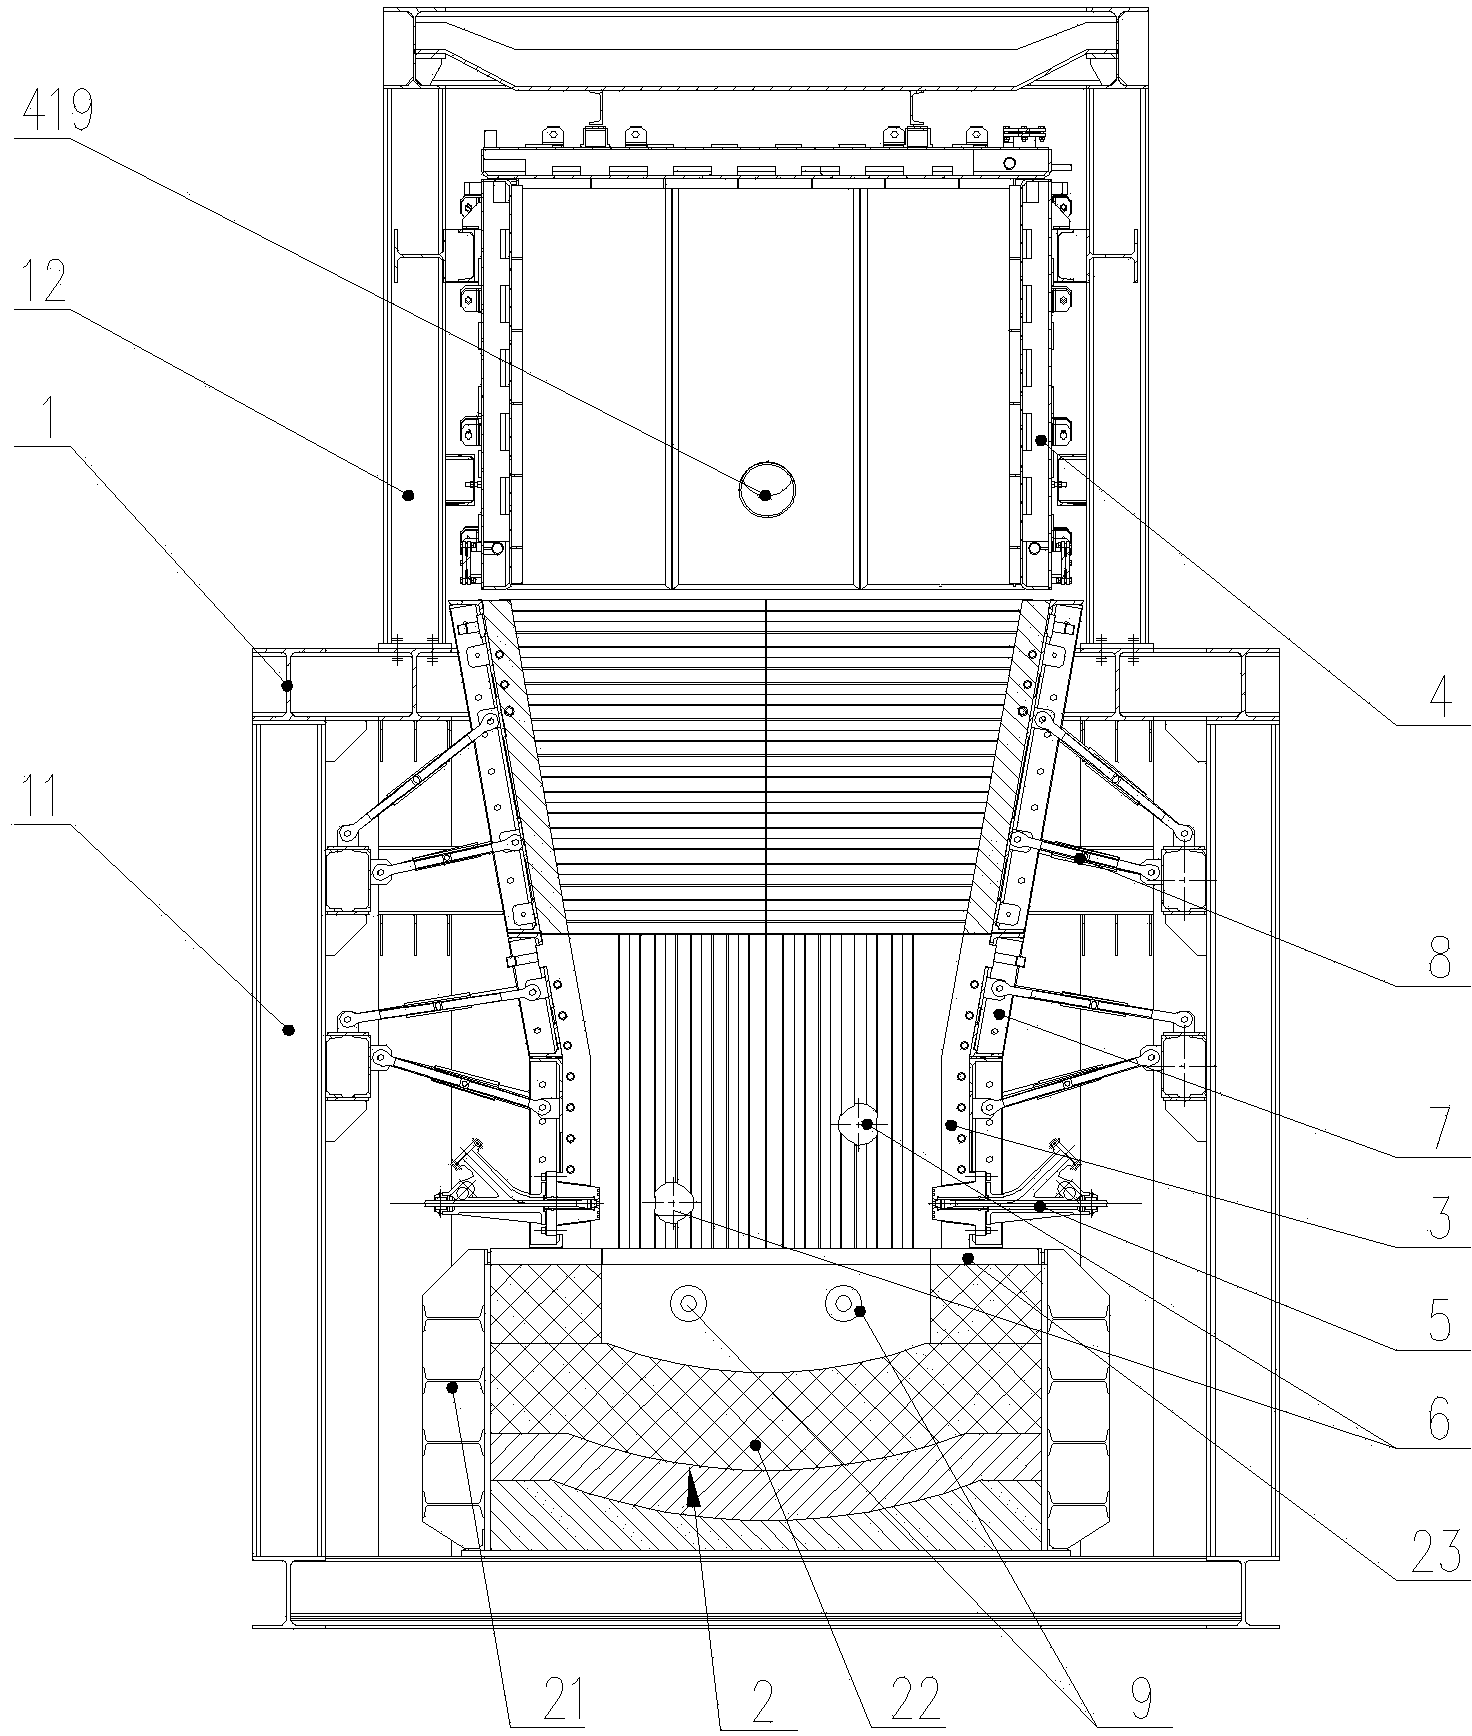 Oxygen-enriched smelting furnace for treating low-grade multi-metal material